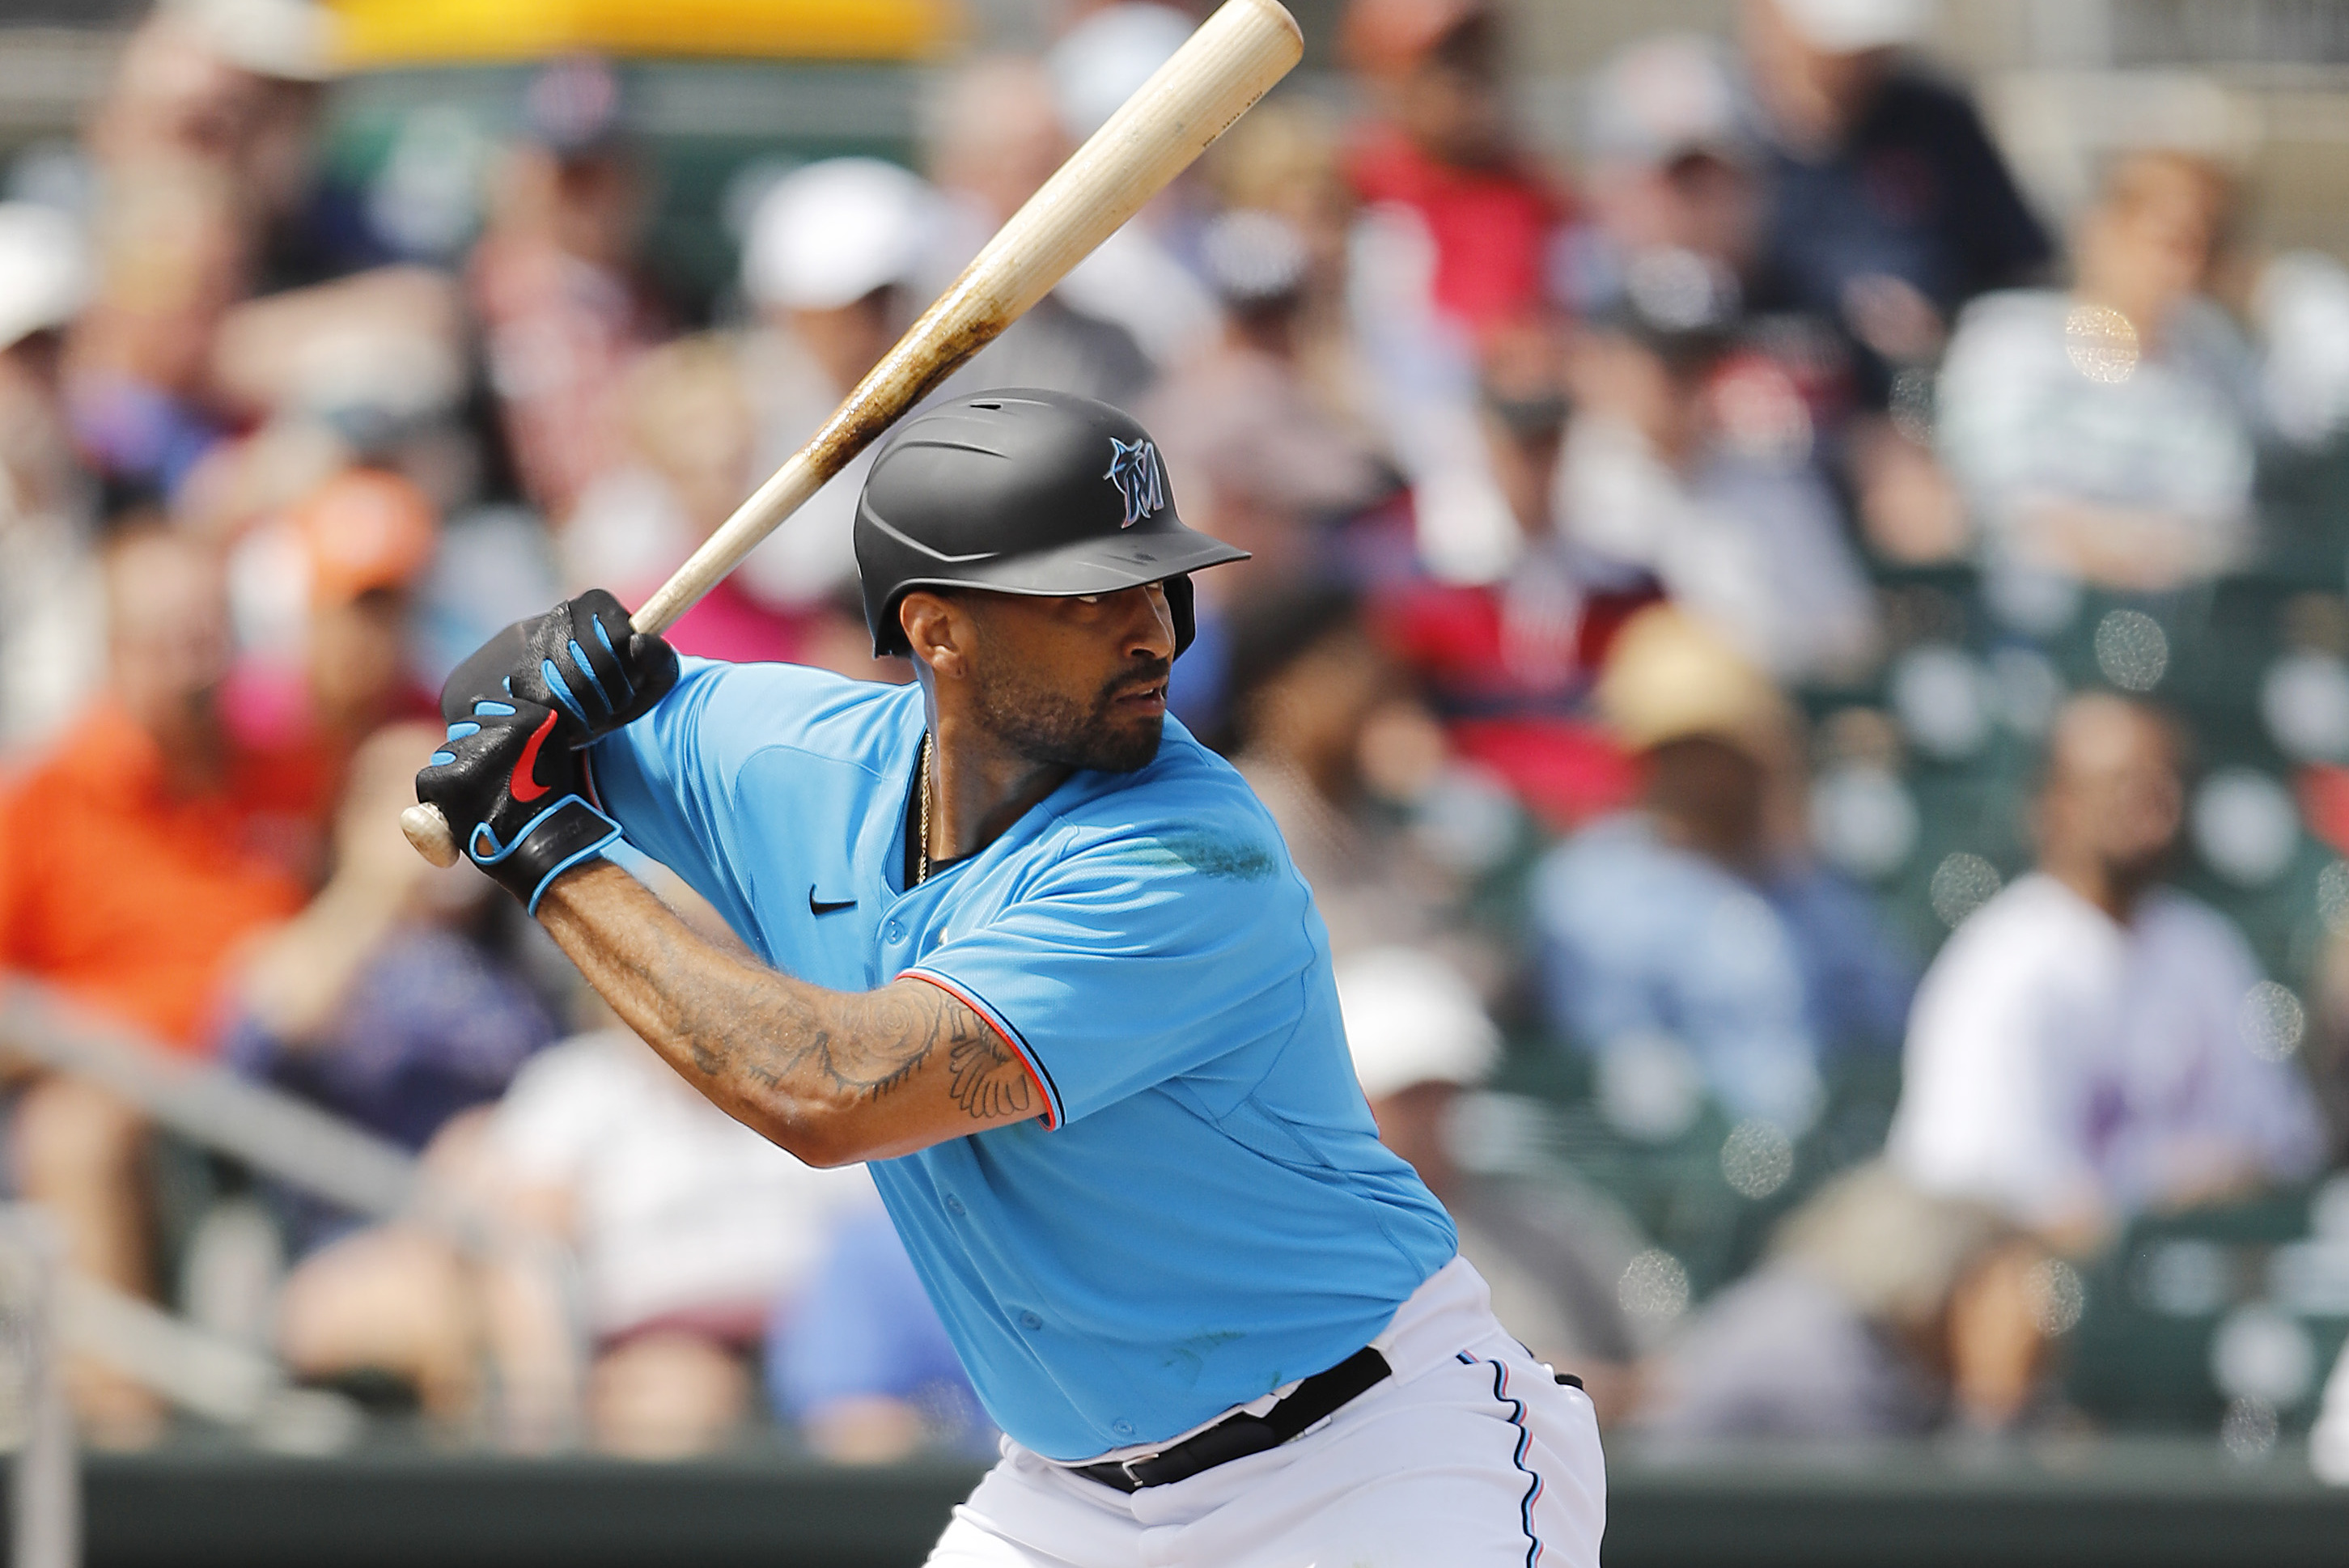 Report: Matt Kemp, Rockies Agree to Minor League Contract After